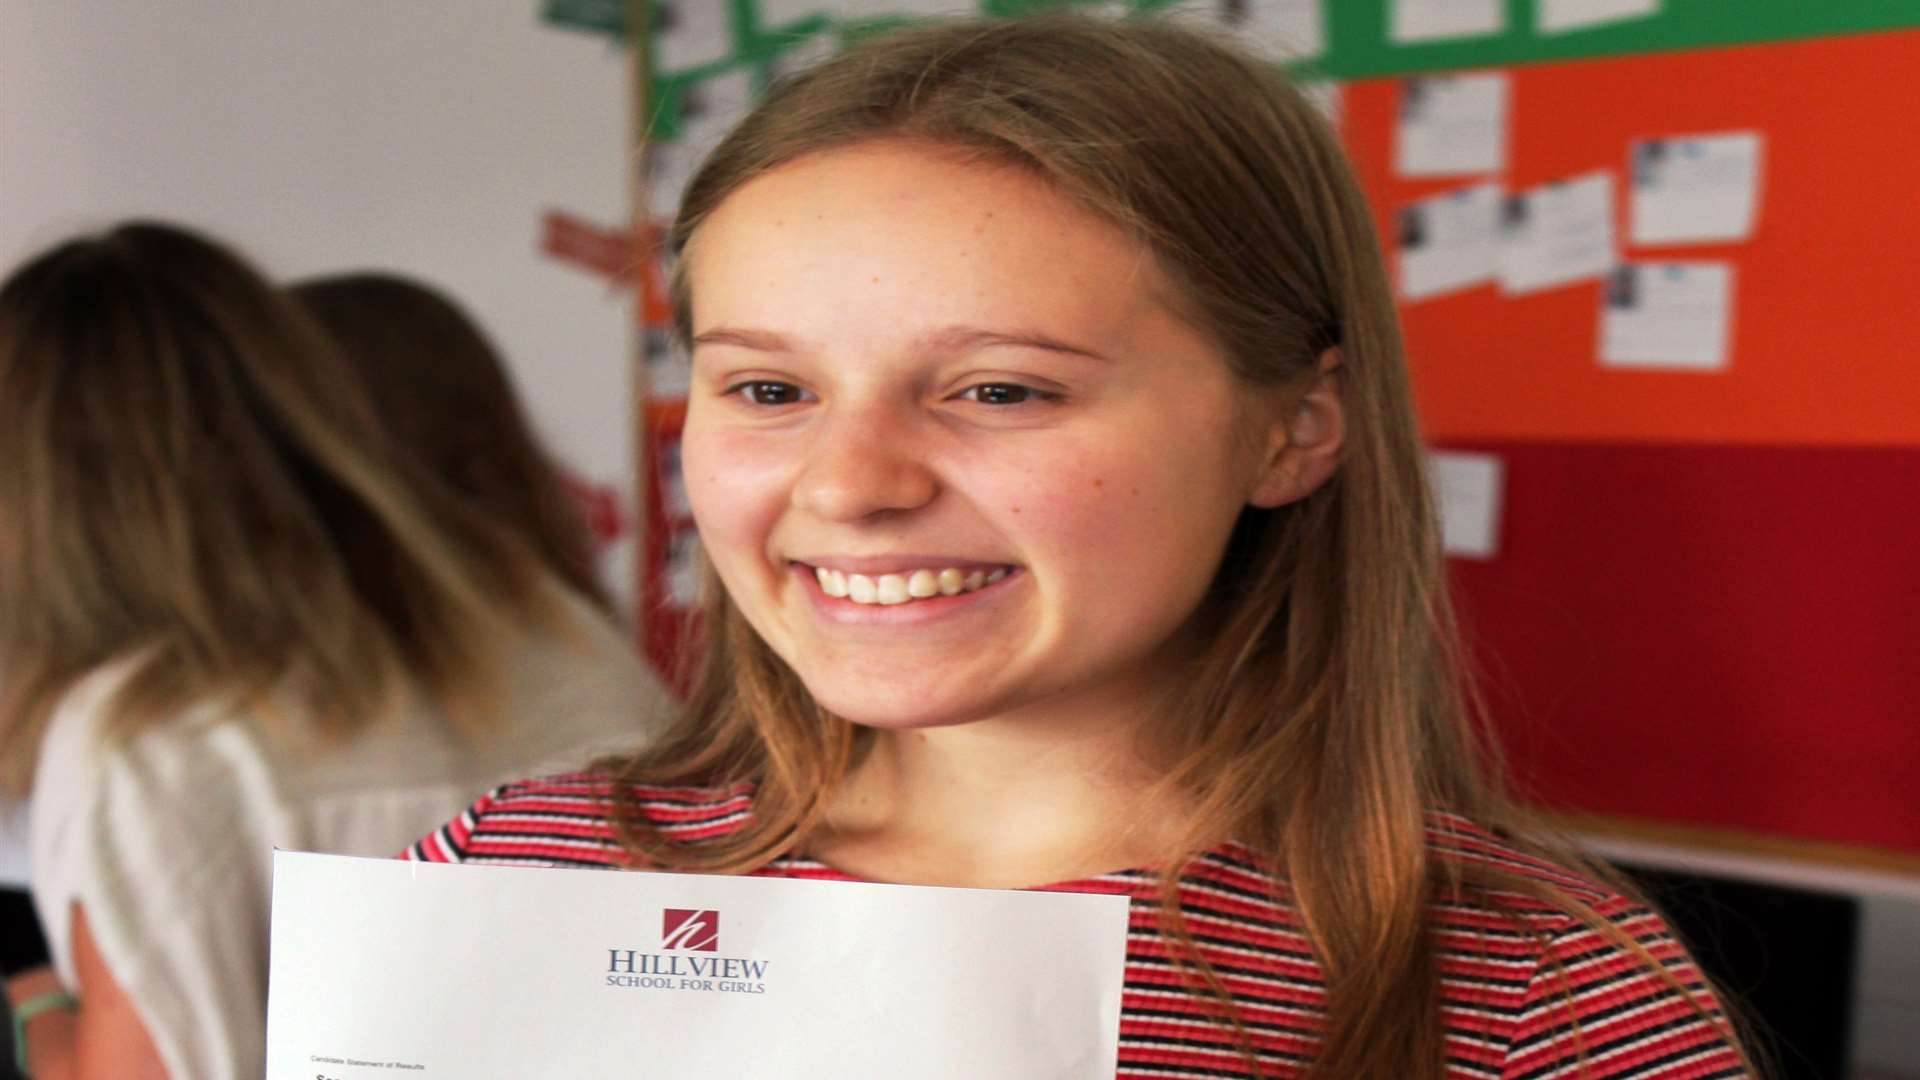 Libby Smith receives her results at Hillview School for Girls in Tonbridge